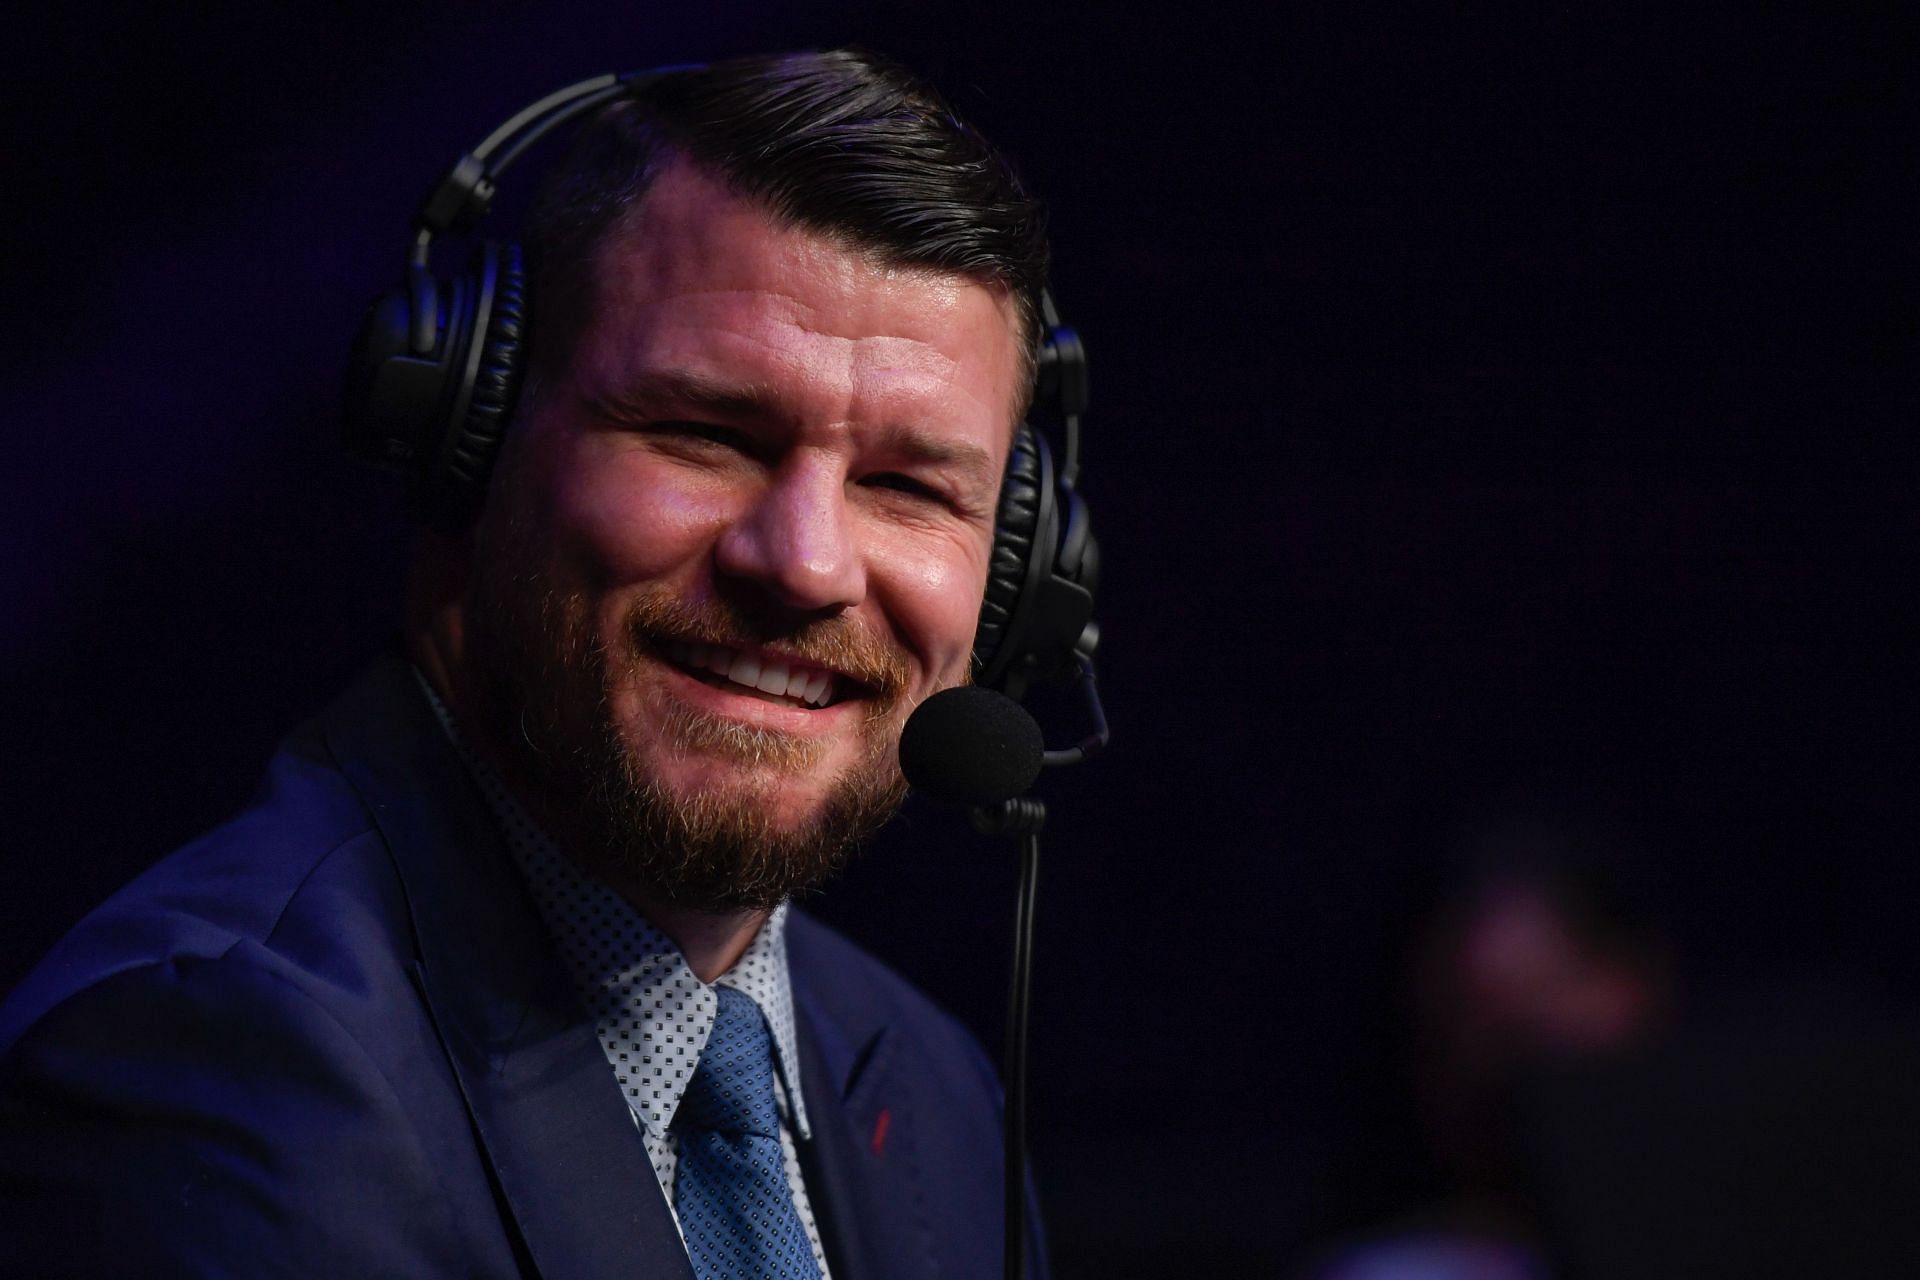 Michael Bisping behind the announce table